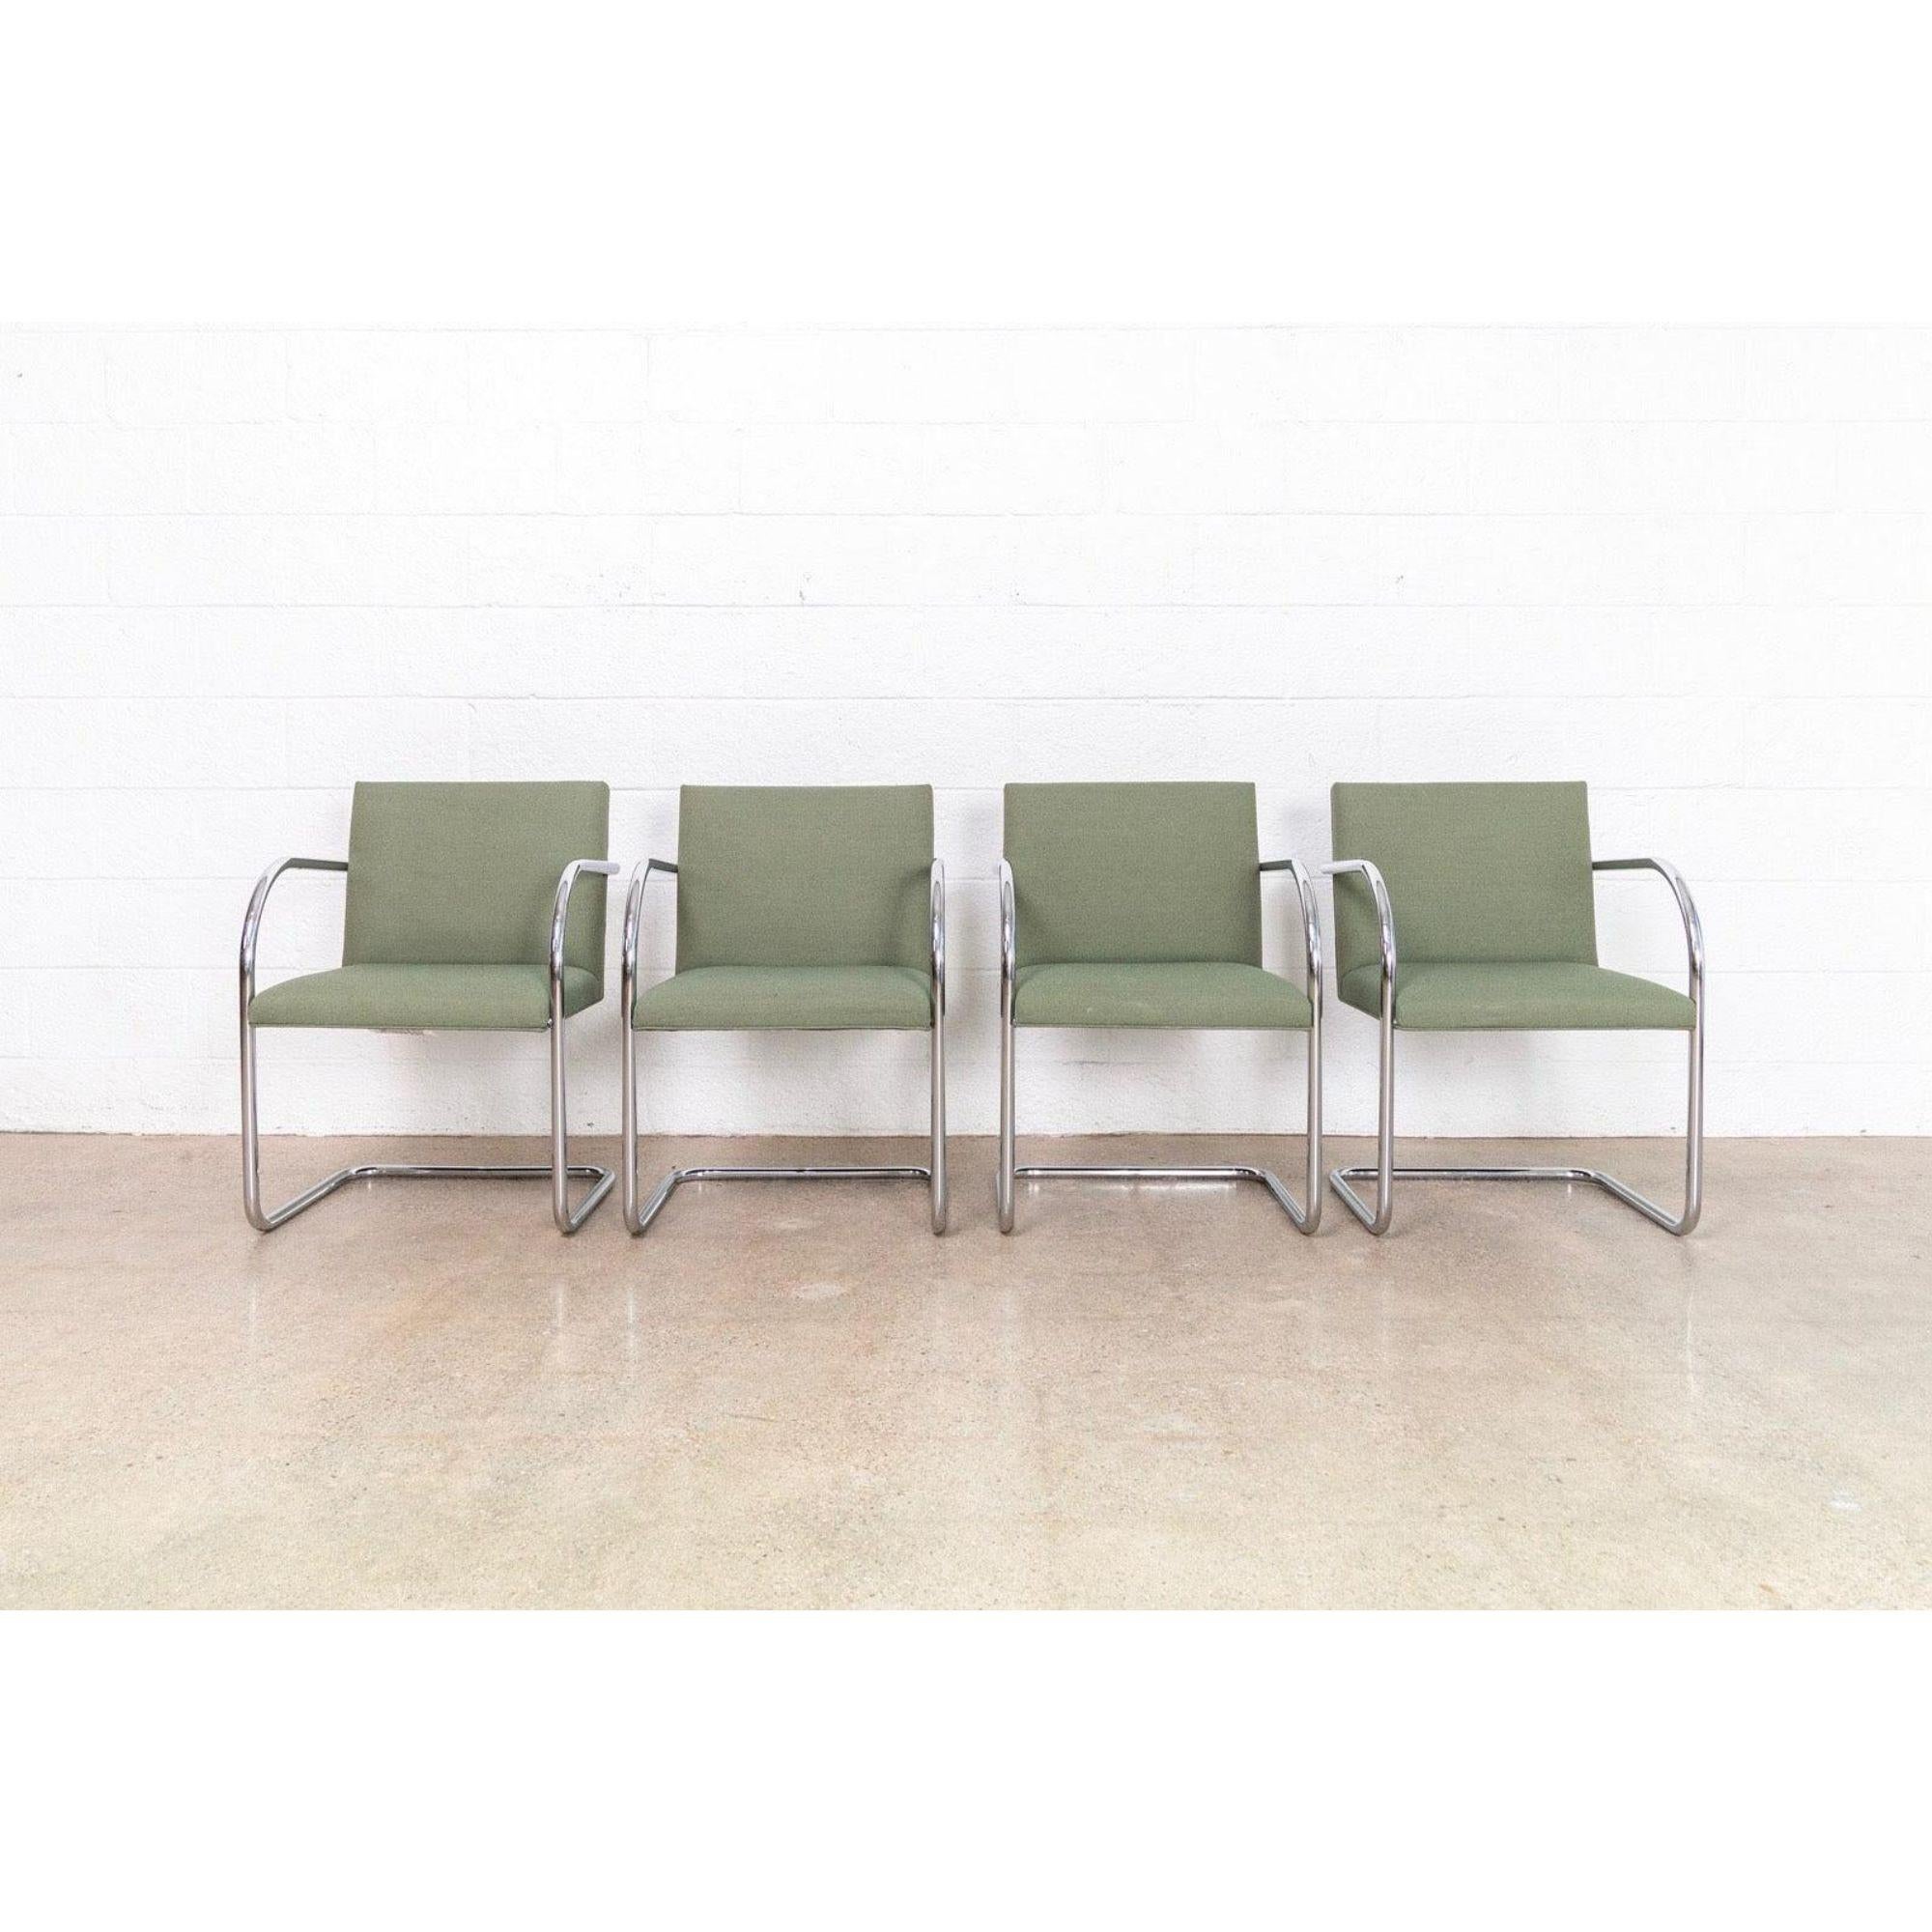 This set of four Mies van der Rohe Brno armchairs made by Gordon International are circa 1990. These iconic Bauhaus modernist chairs designed by Mies van der Rohe in 1930 feature clean lines and a simple profile. Model 504 has a cantilevered frame